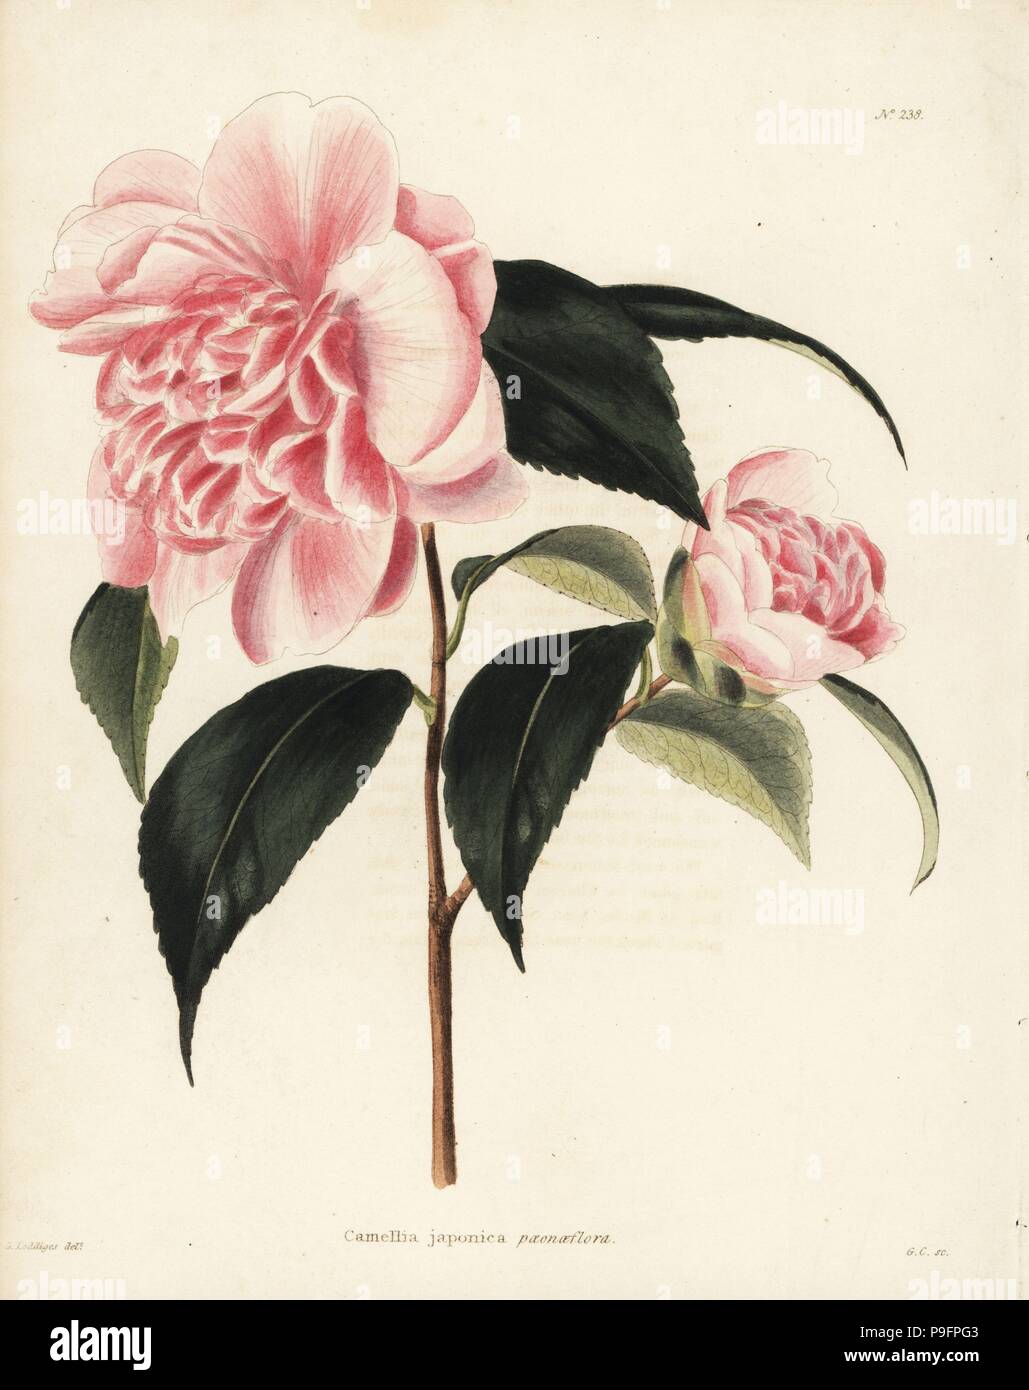 Camellia variety, Camellia japonica paeonaeflora. Handcoloured copperplate engraving by George Cooke after George Loddiges from Conrad Loddiges' Botanical Cabinet, Hackney, 1817. Stock Photo